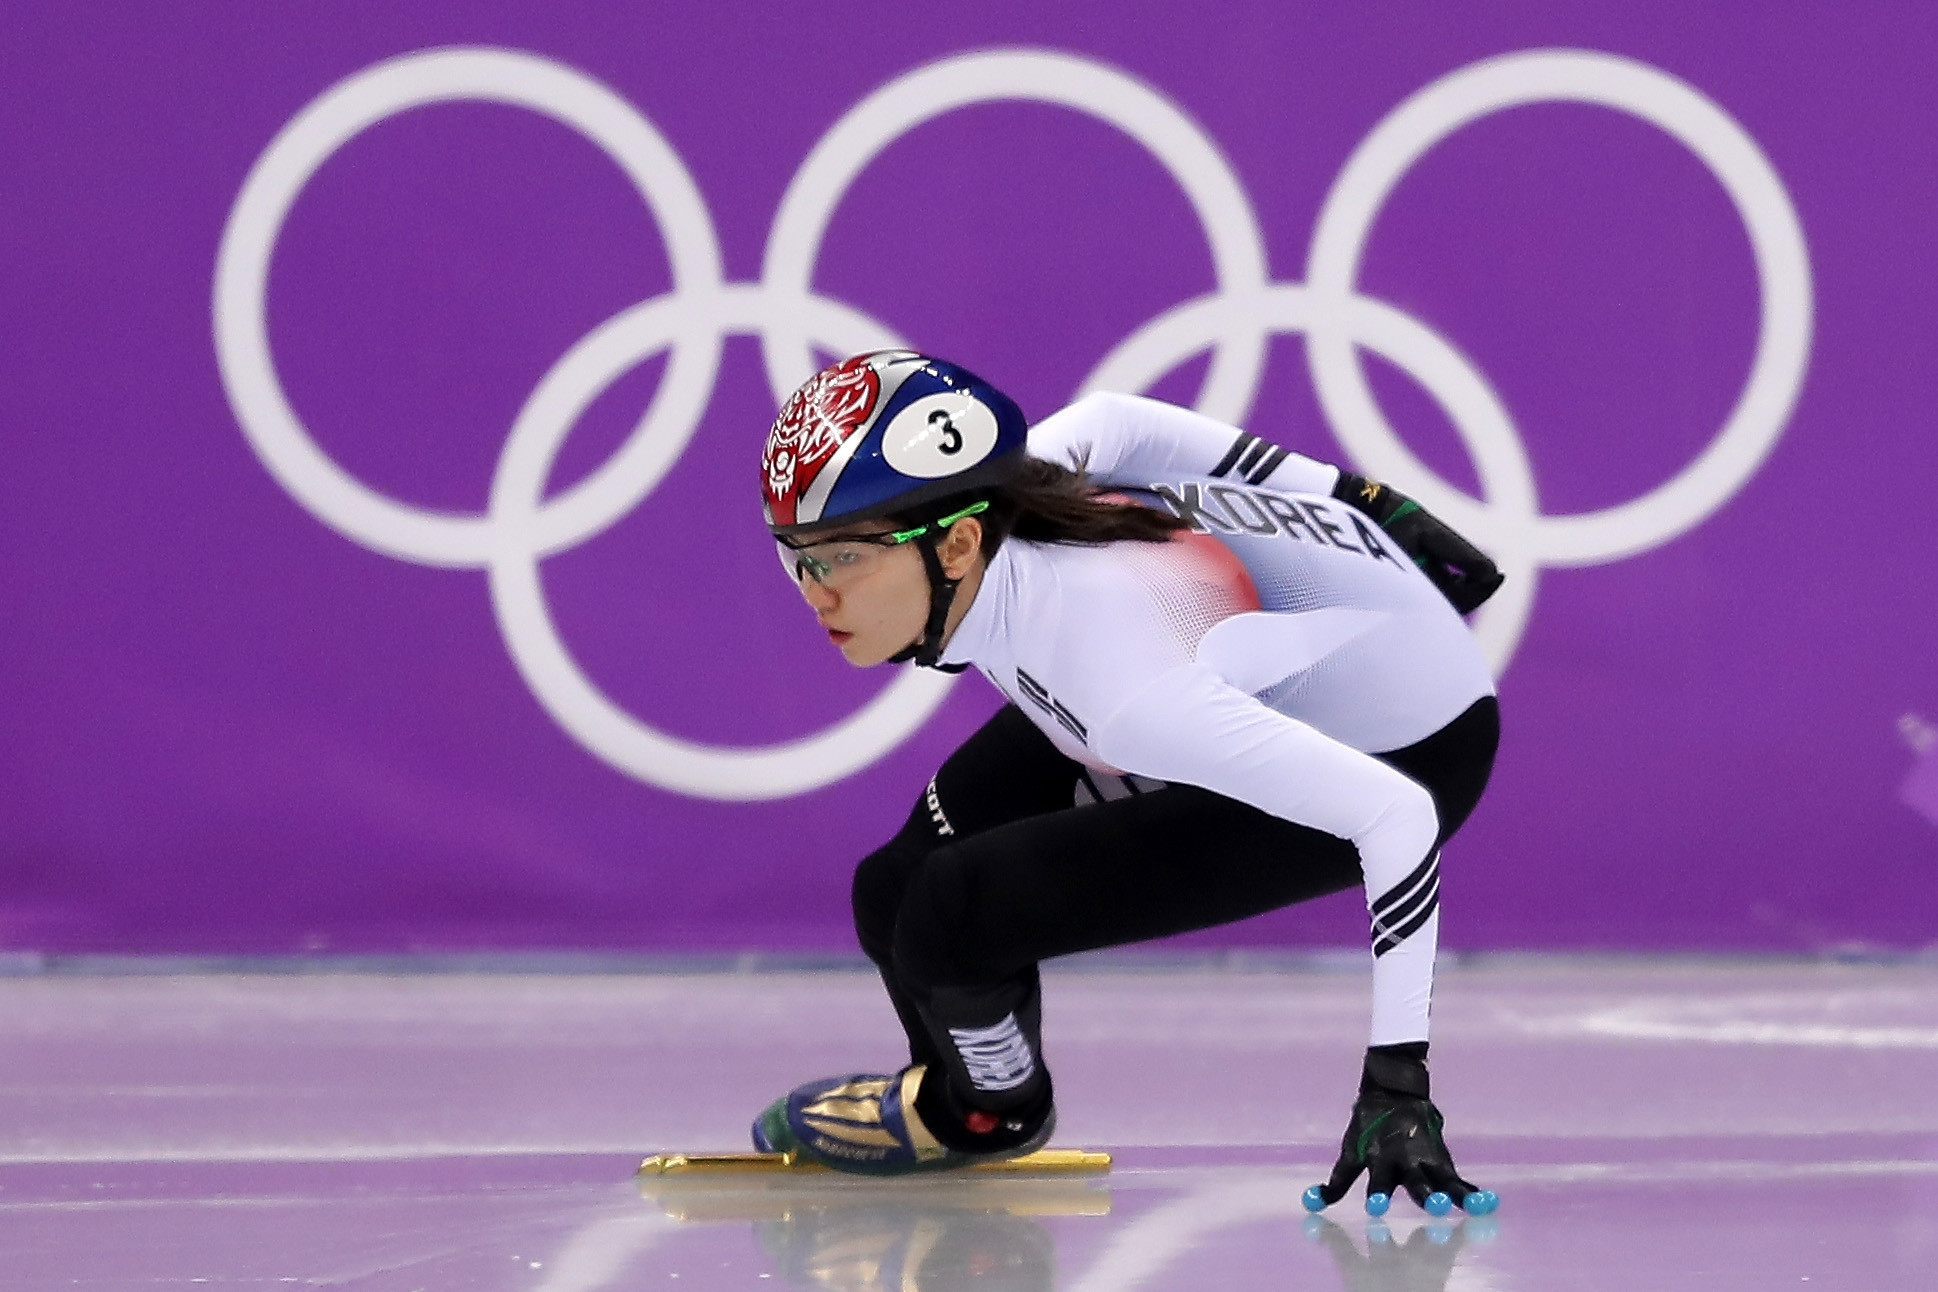 Shim Suk-hee will miss the Beijing 2022 Winter Olympics after losing her court battle ©Getty Images